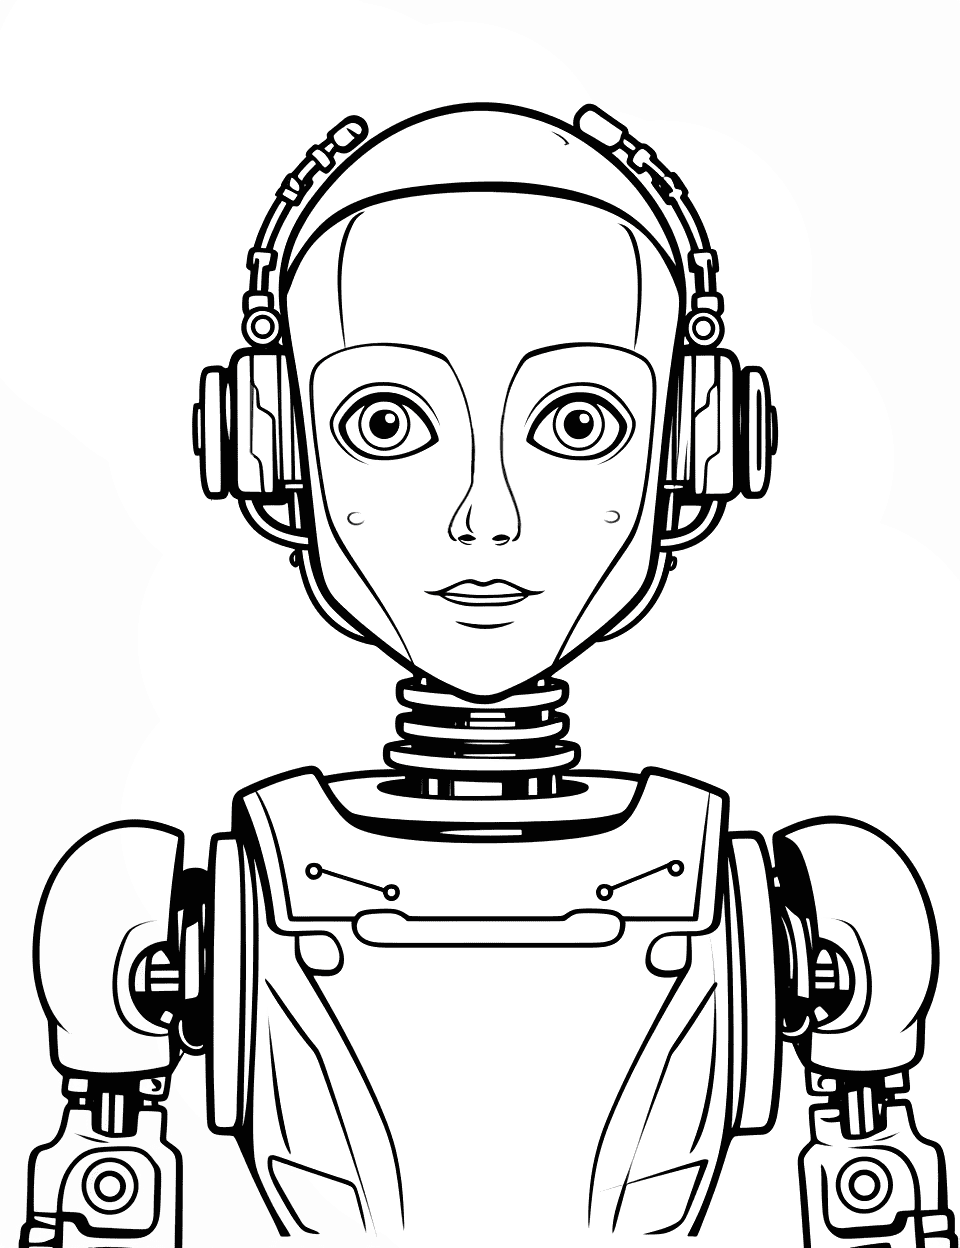 Realistic Humanoid Robot Coloring Page - A robot that closely resembles a human.